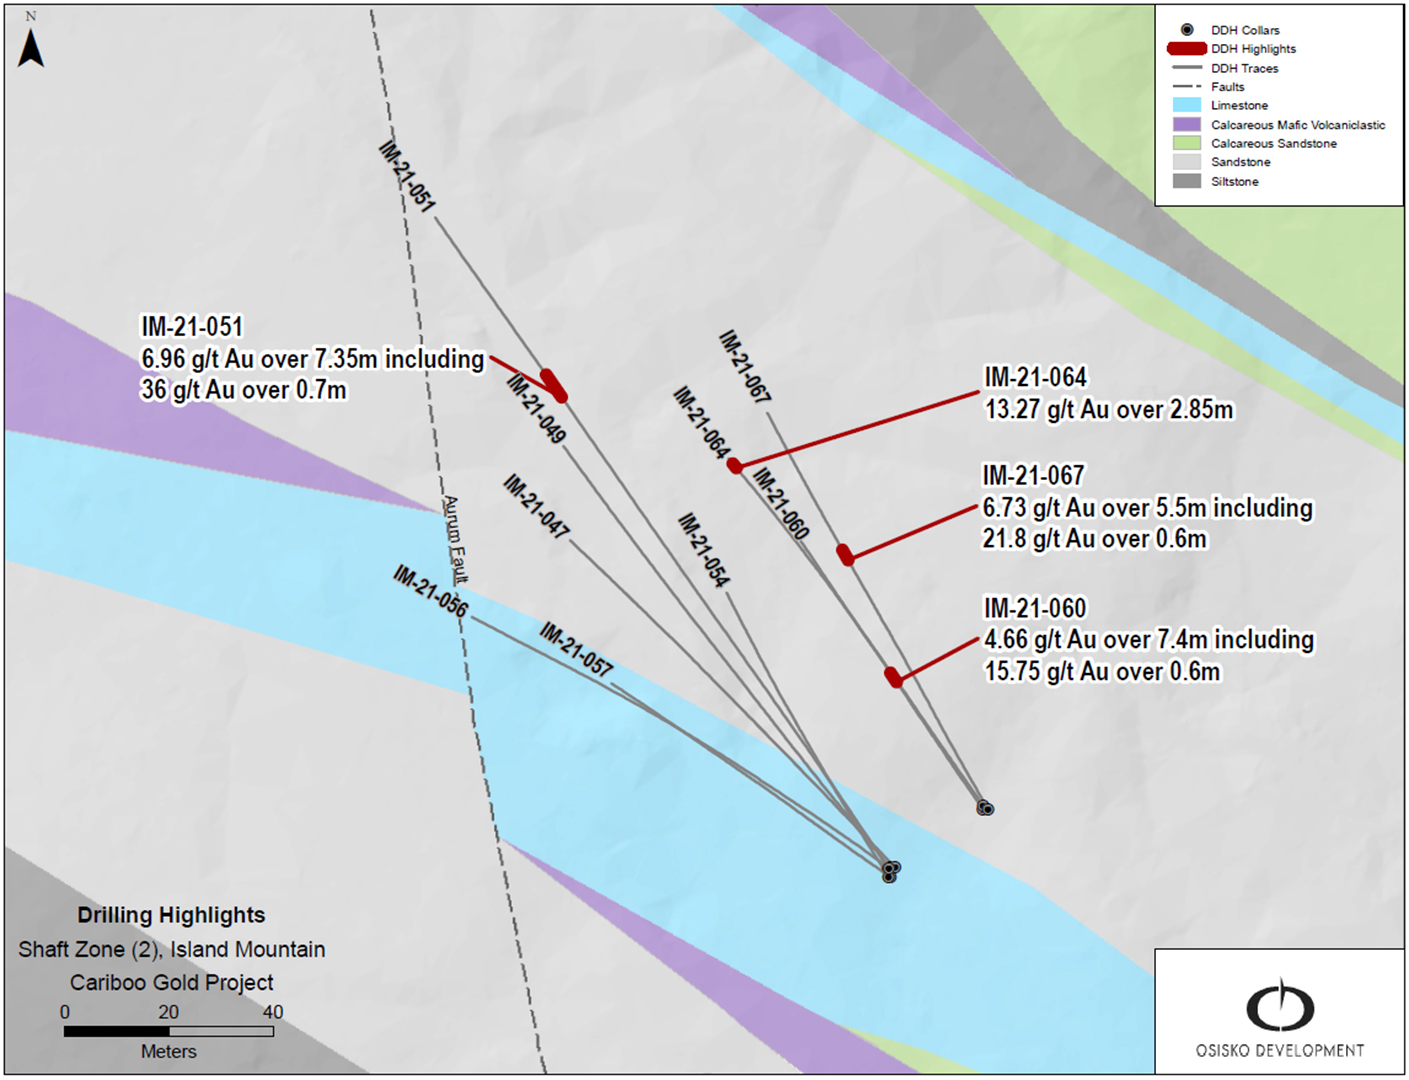 Figure 5: Shaft Zone select drilling highlights